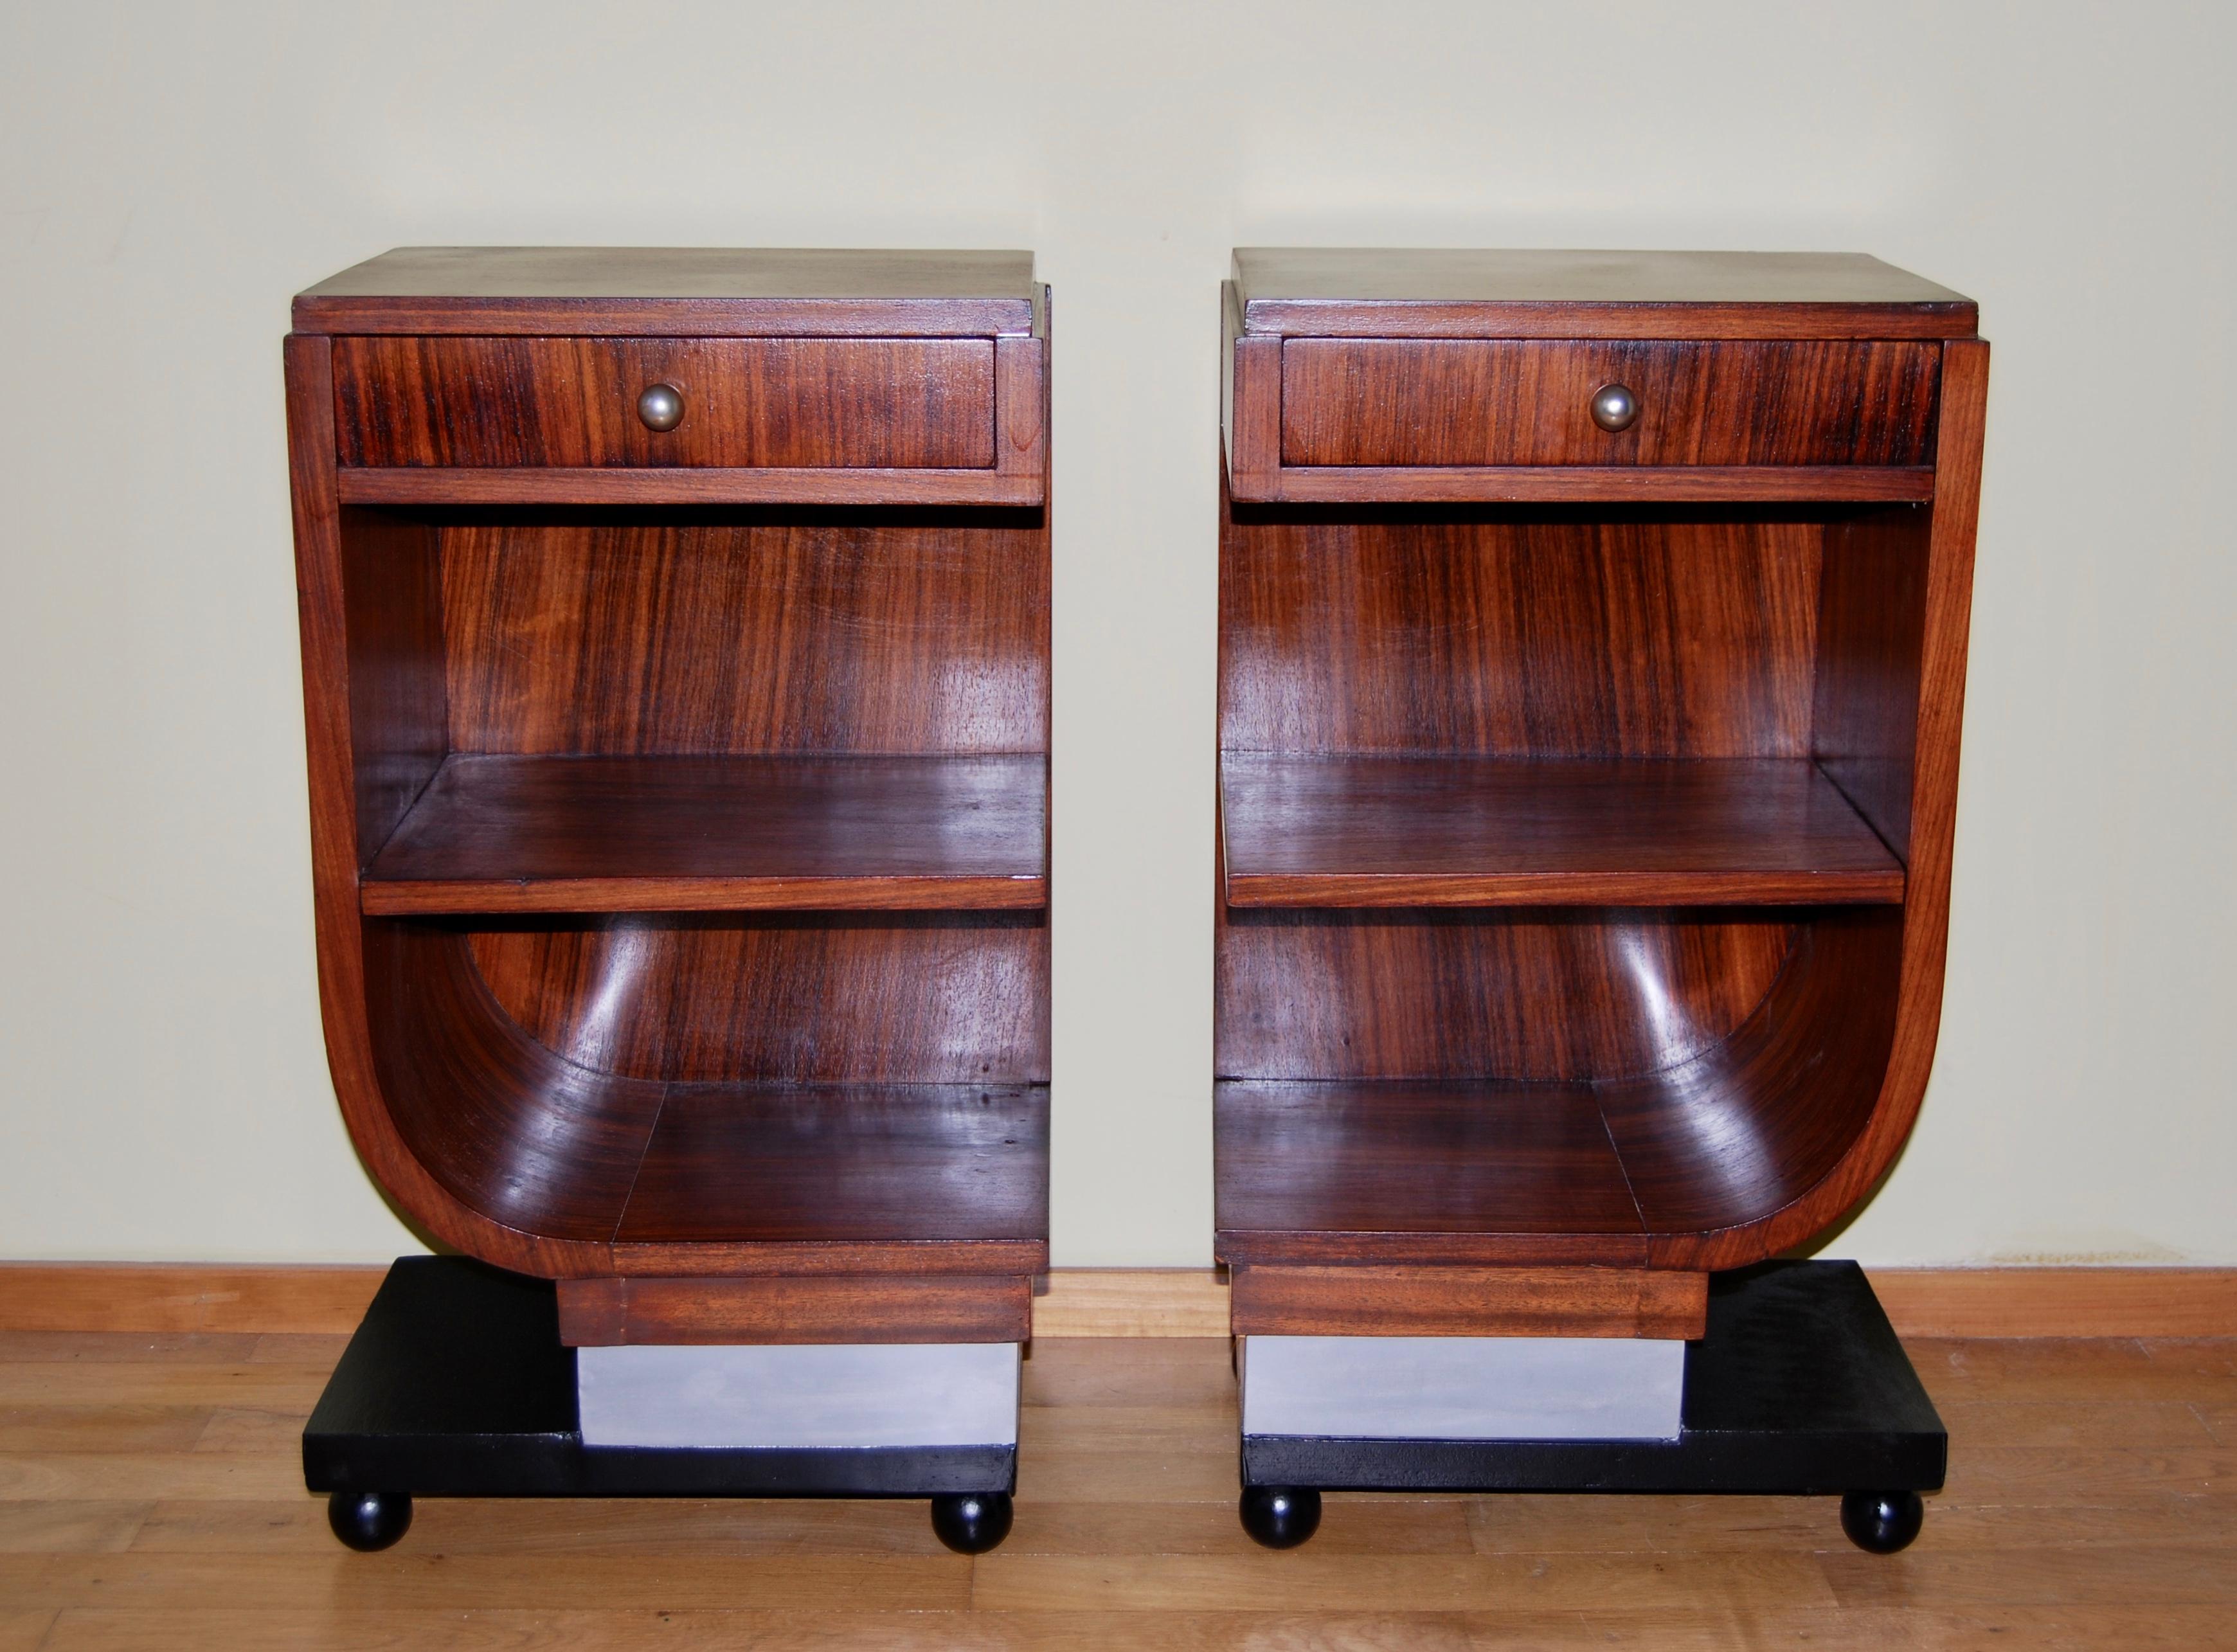 Beautiful pair of asymmetrical French Art Deco bedside tables.
In Rosewood veneer each has an opening drawer with original steel ball drawer handle & 2 shelves
The base is a chrome coloured plinth with black wooden support on ball feet.